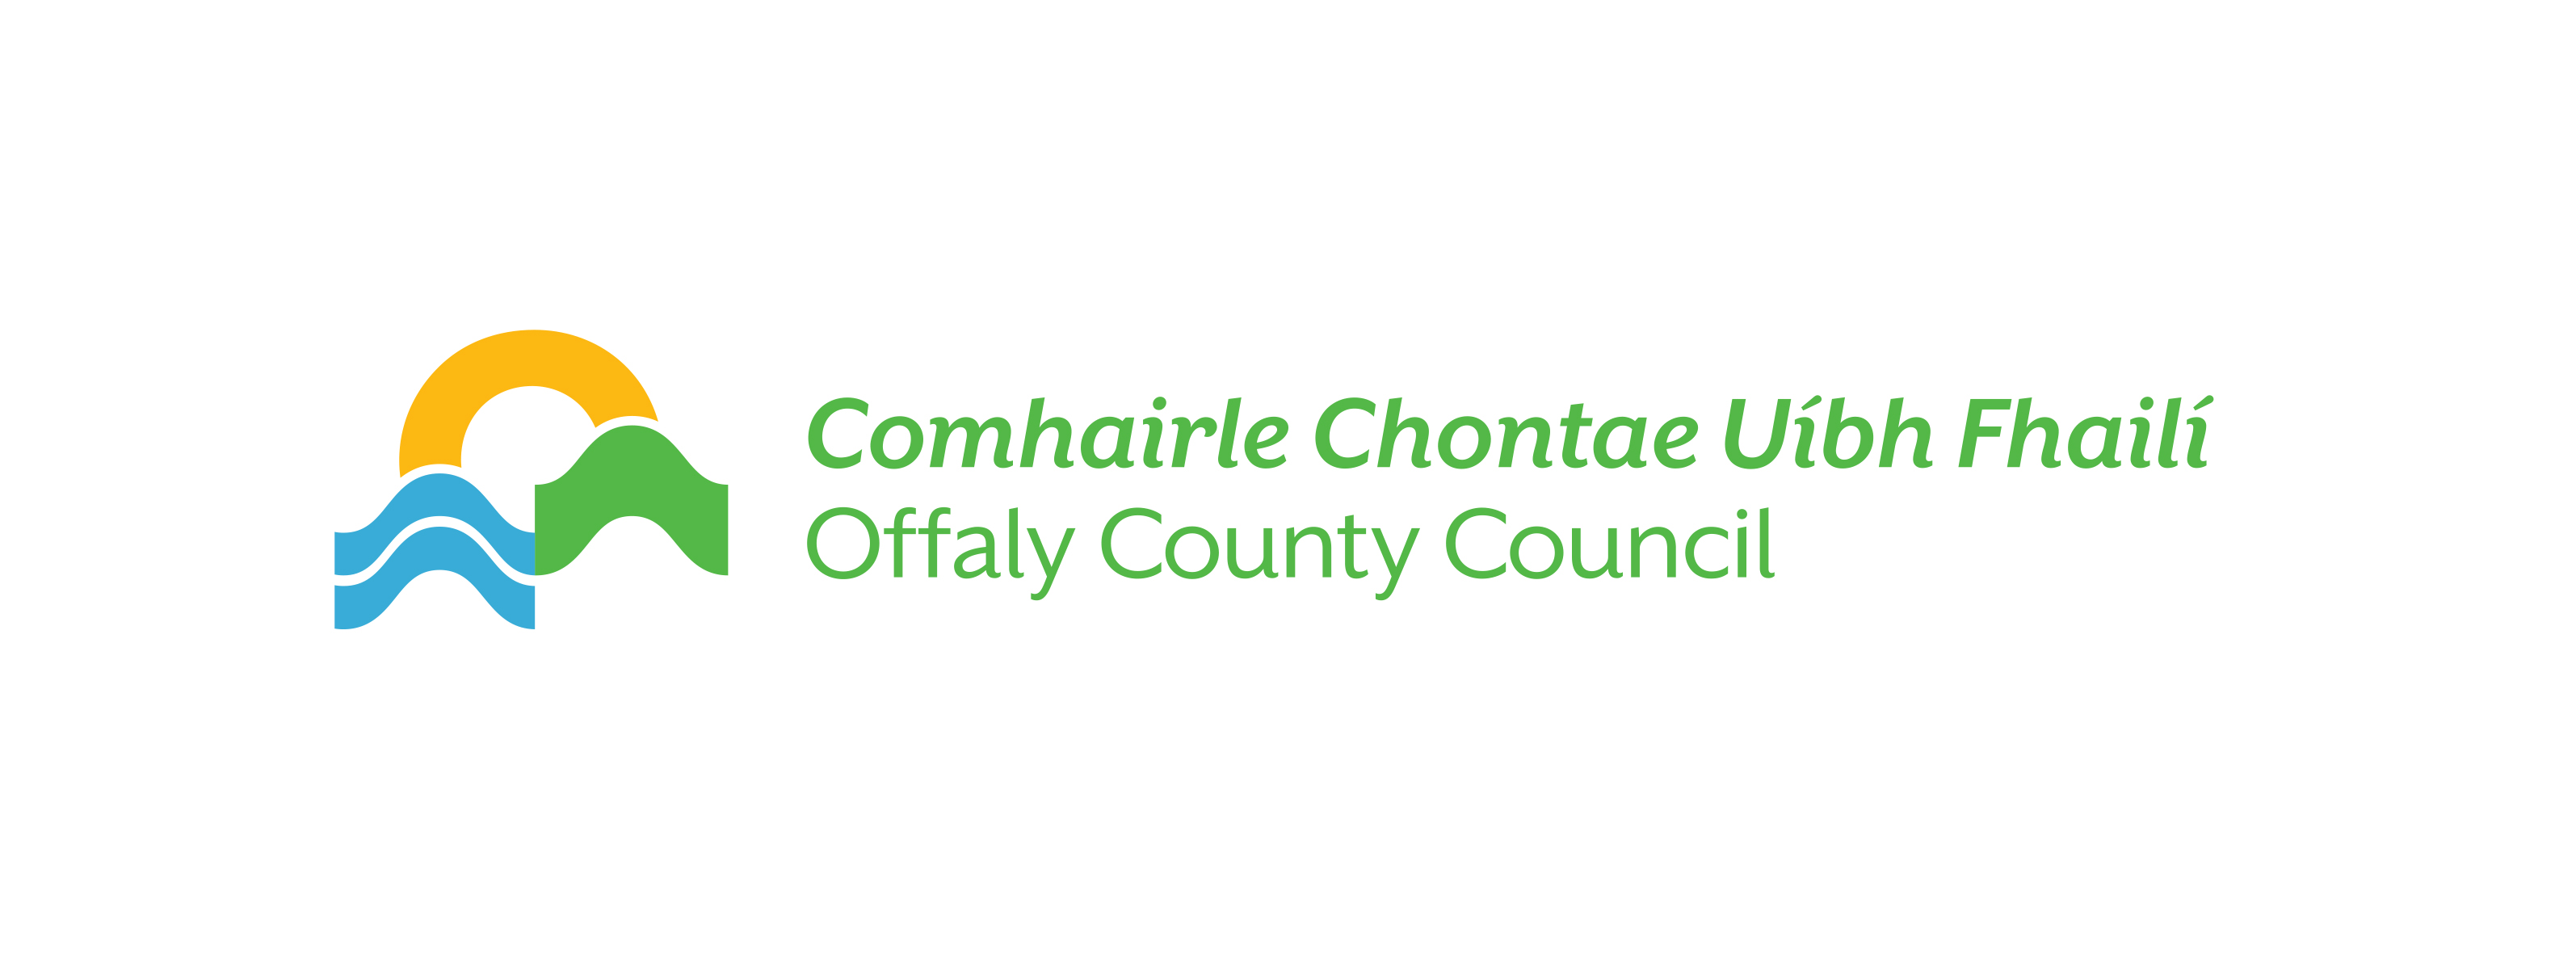 Offaly County Council